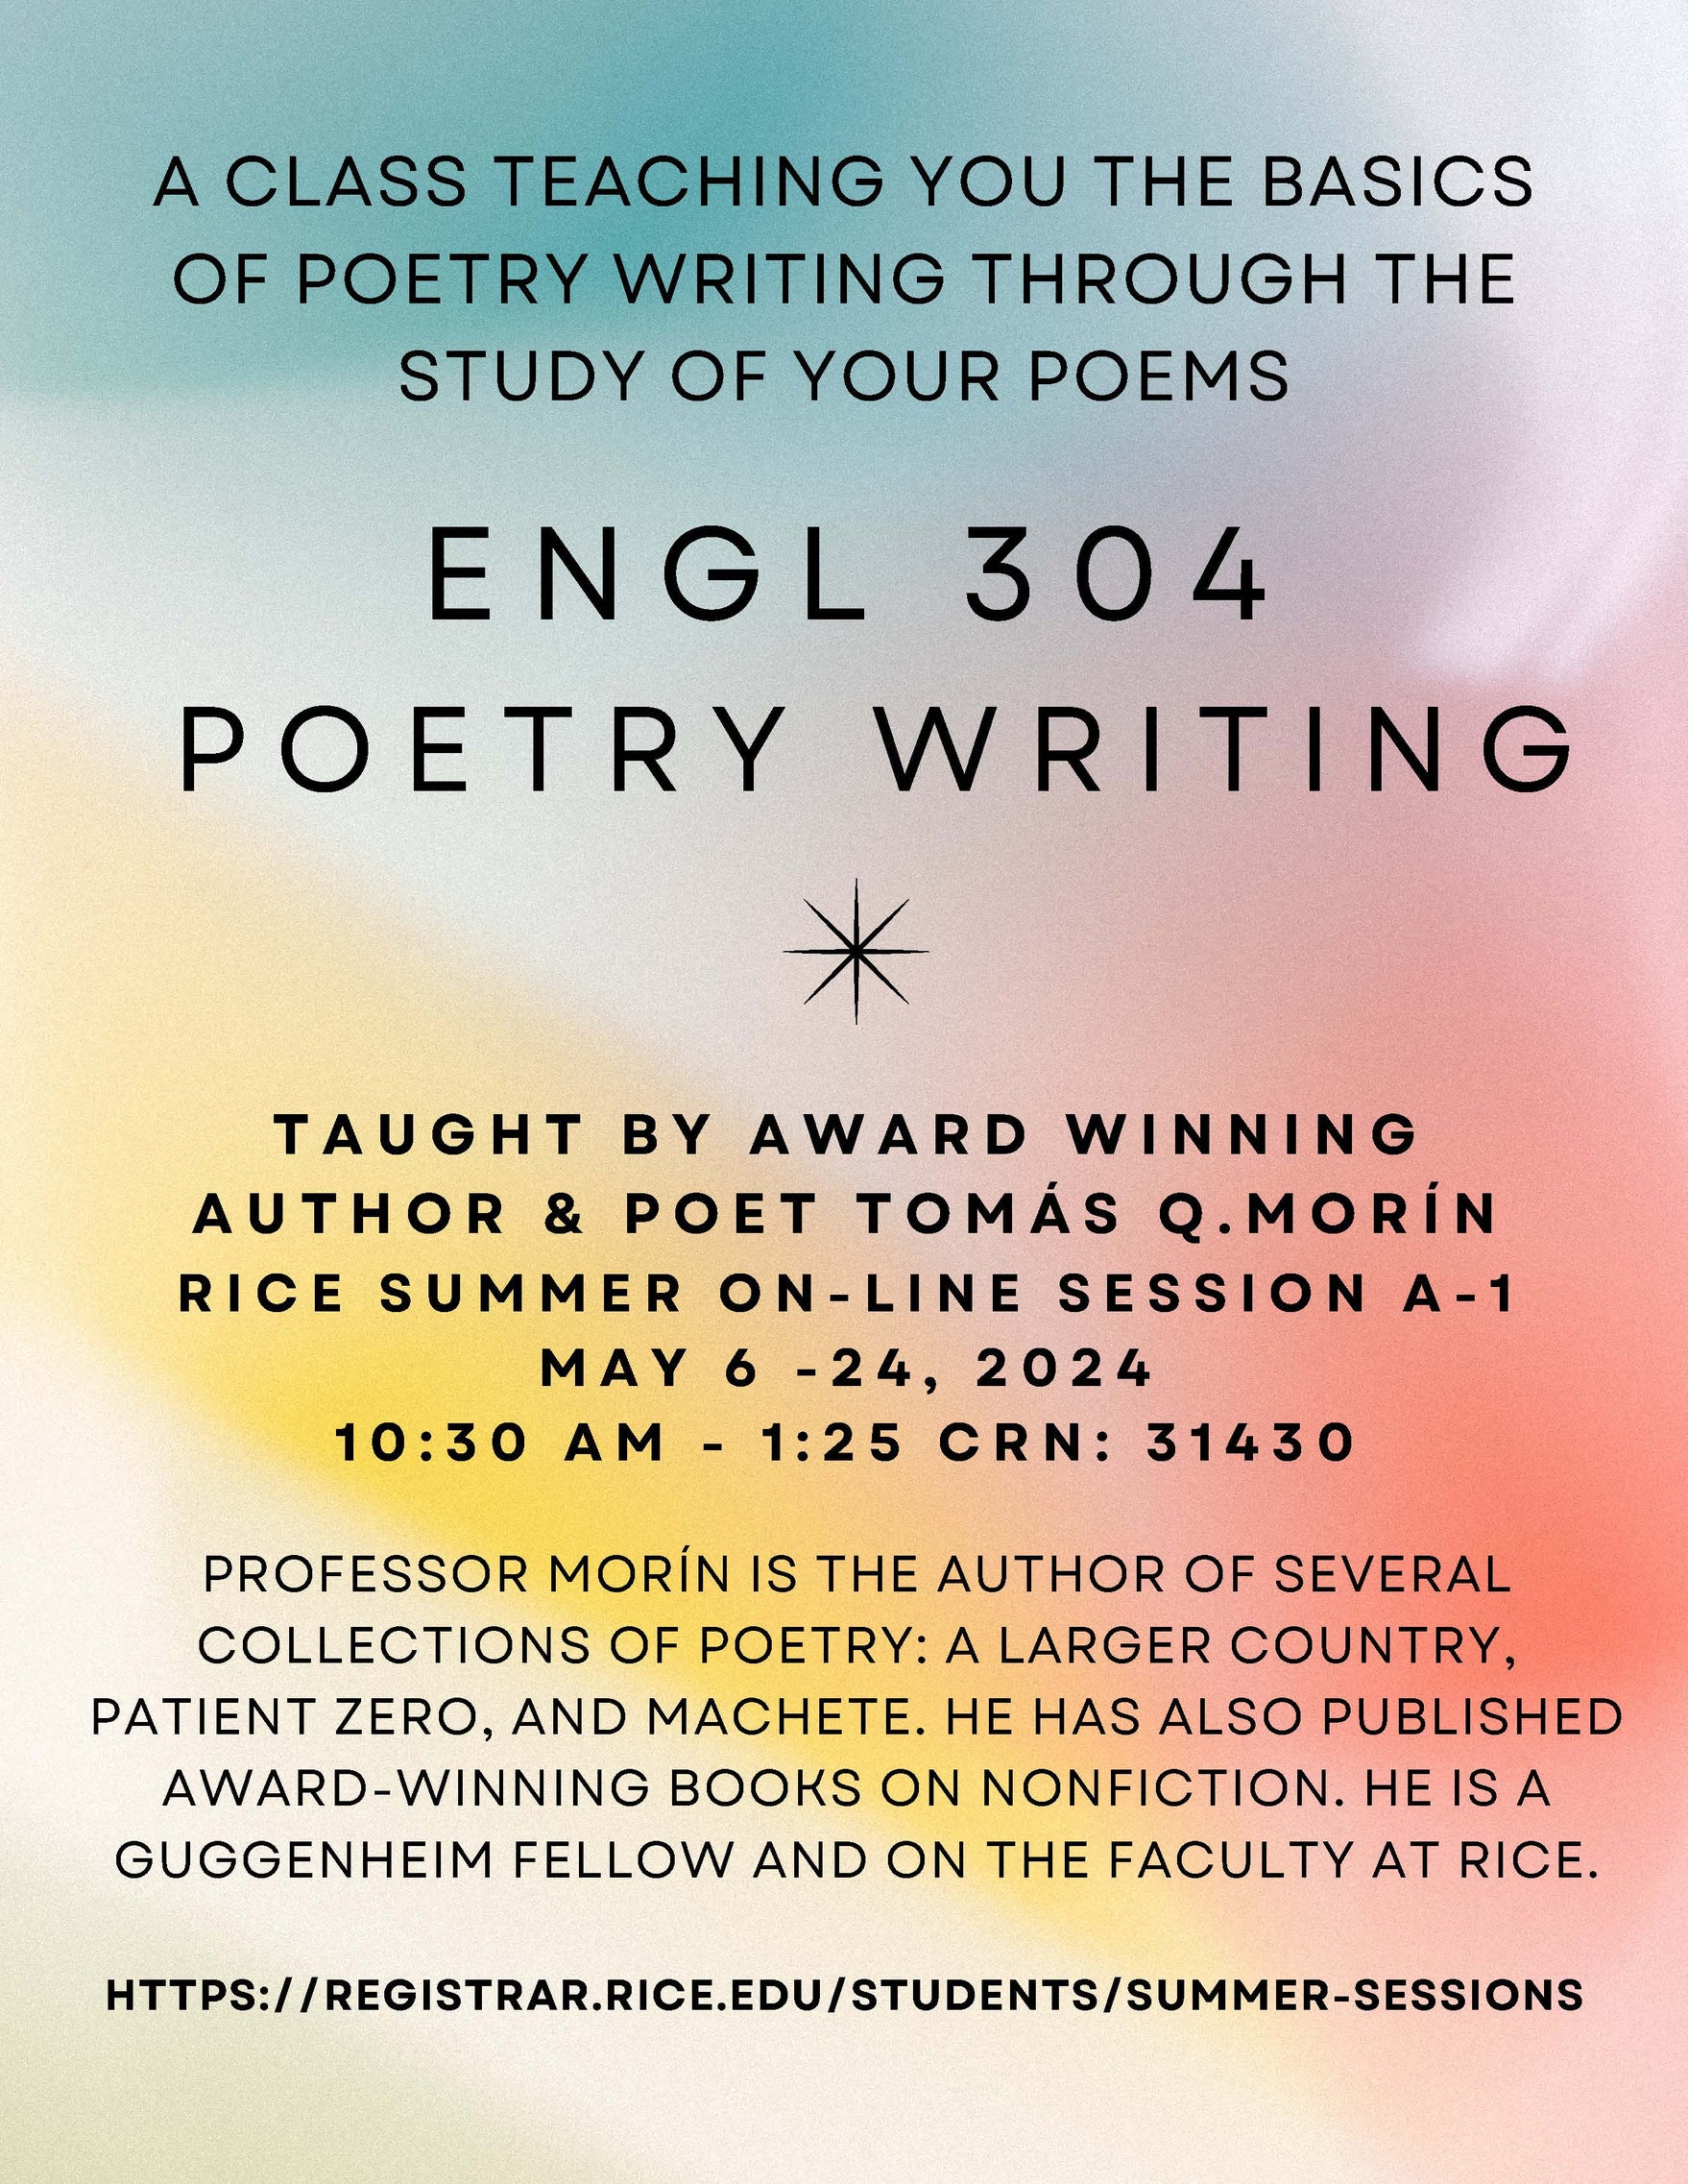 Summer course, English 304, Poetry Writing, with Professor Morín